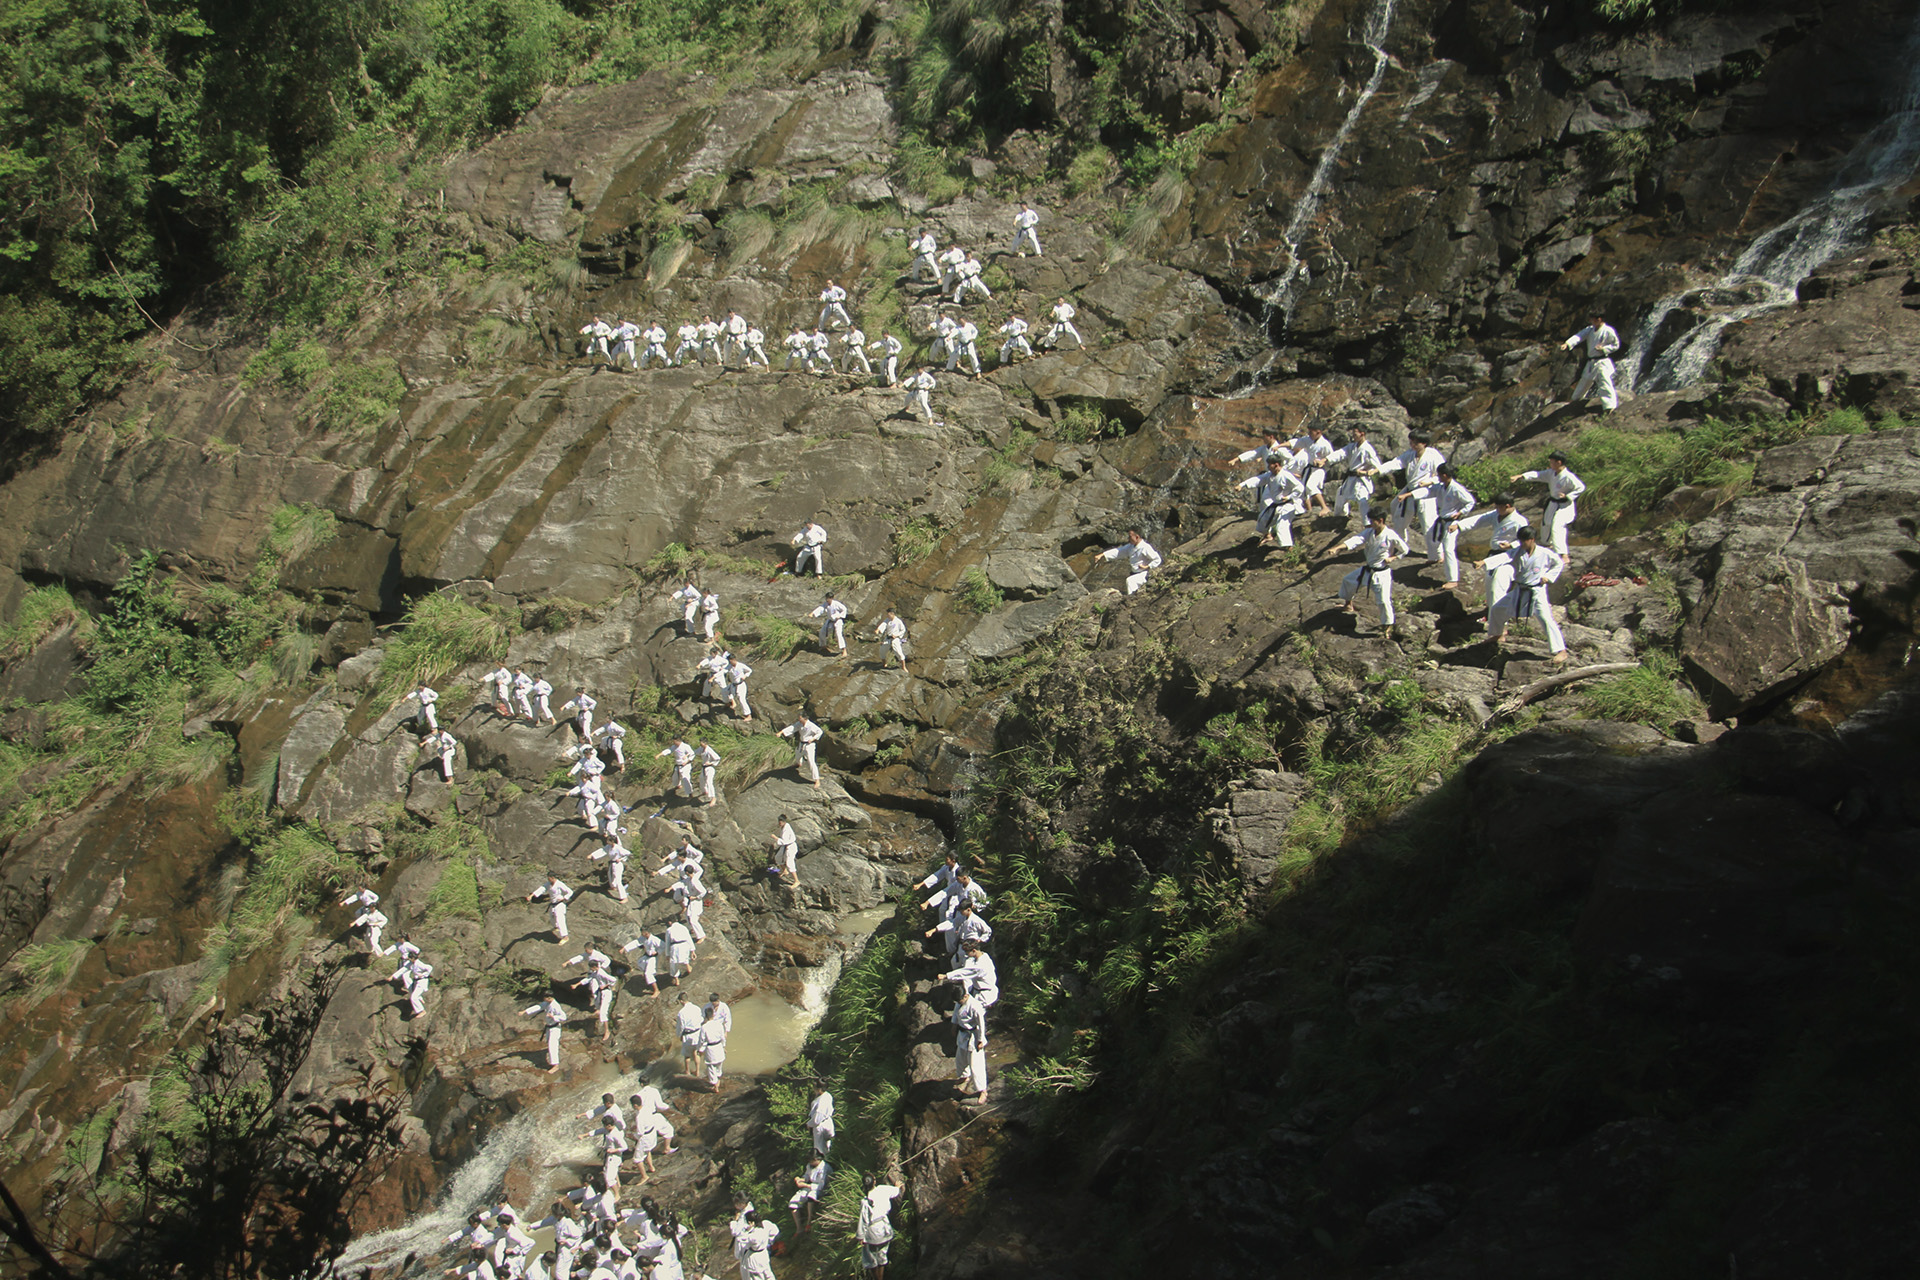 Black Belts on Bach Ma Mountain: 280 black belts Karate students train by a waterfall up the Bach Ma mountains in Central Vietnam.